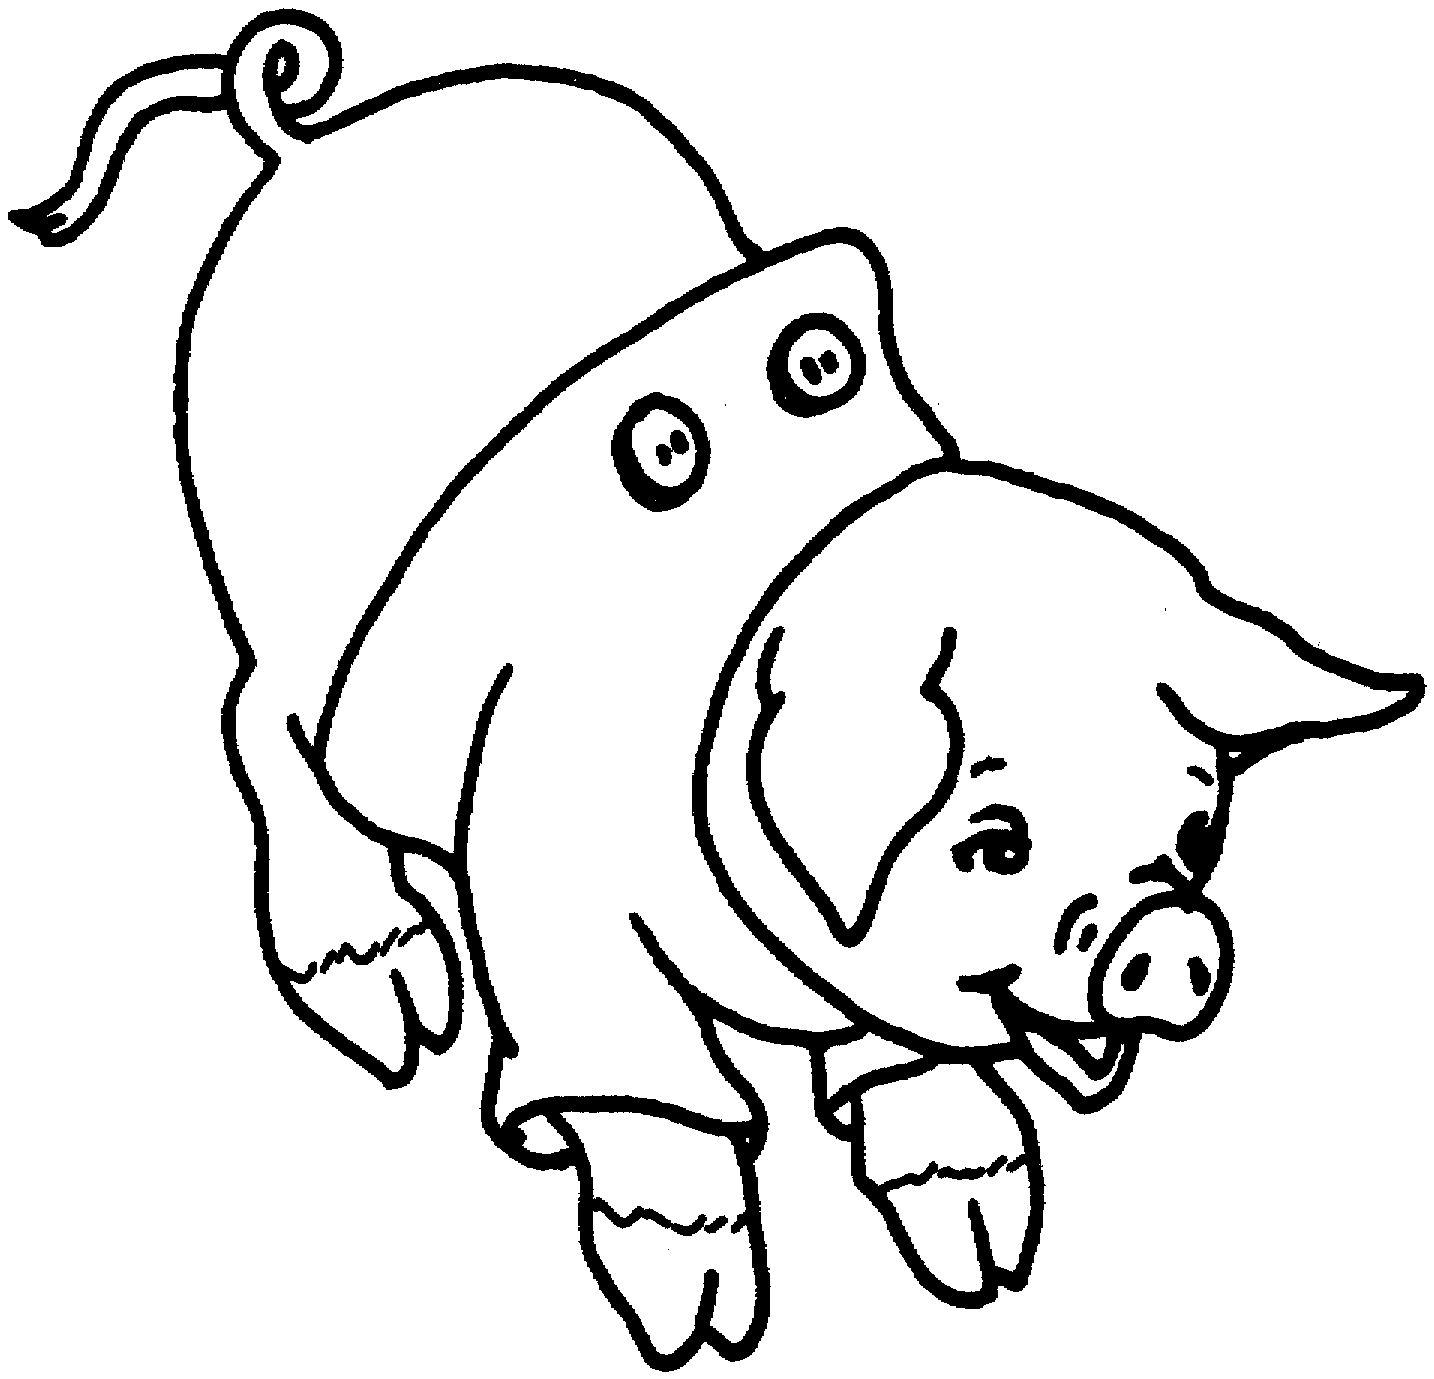 Printable Pig Coloring Pages | Coloring Me